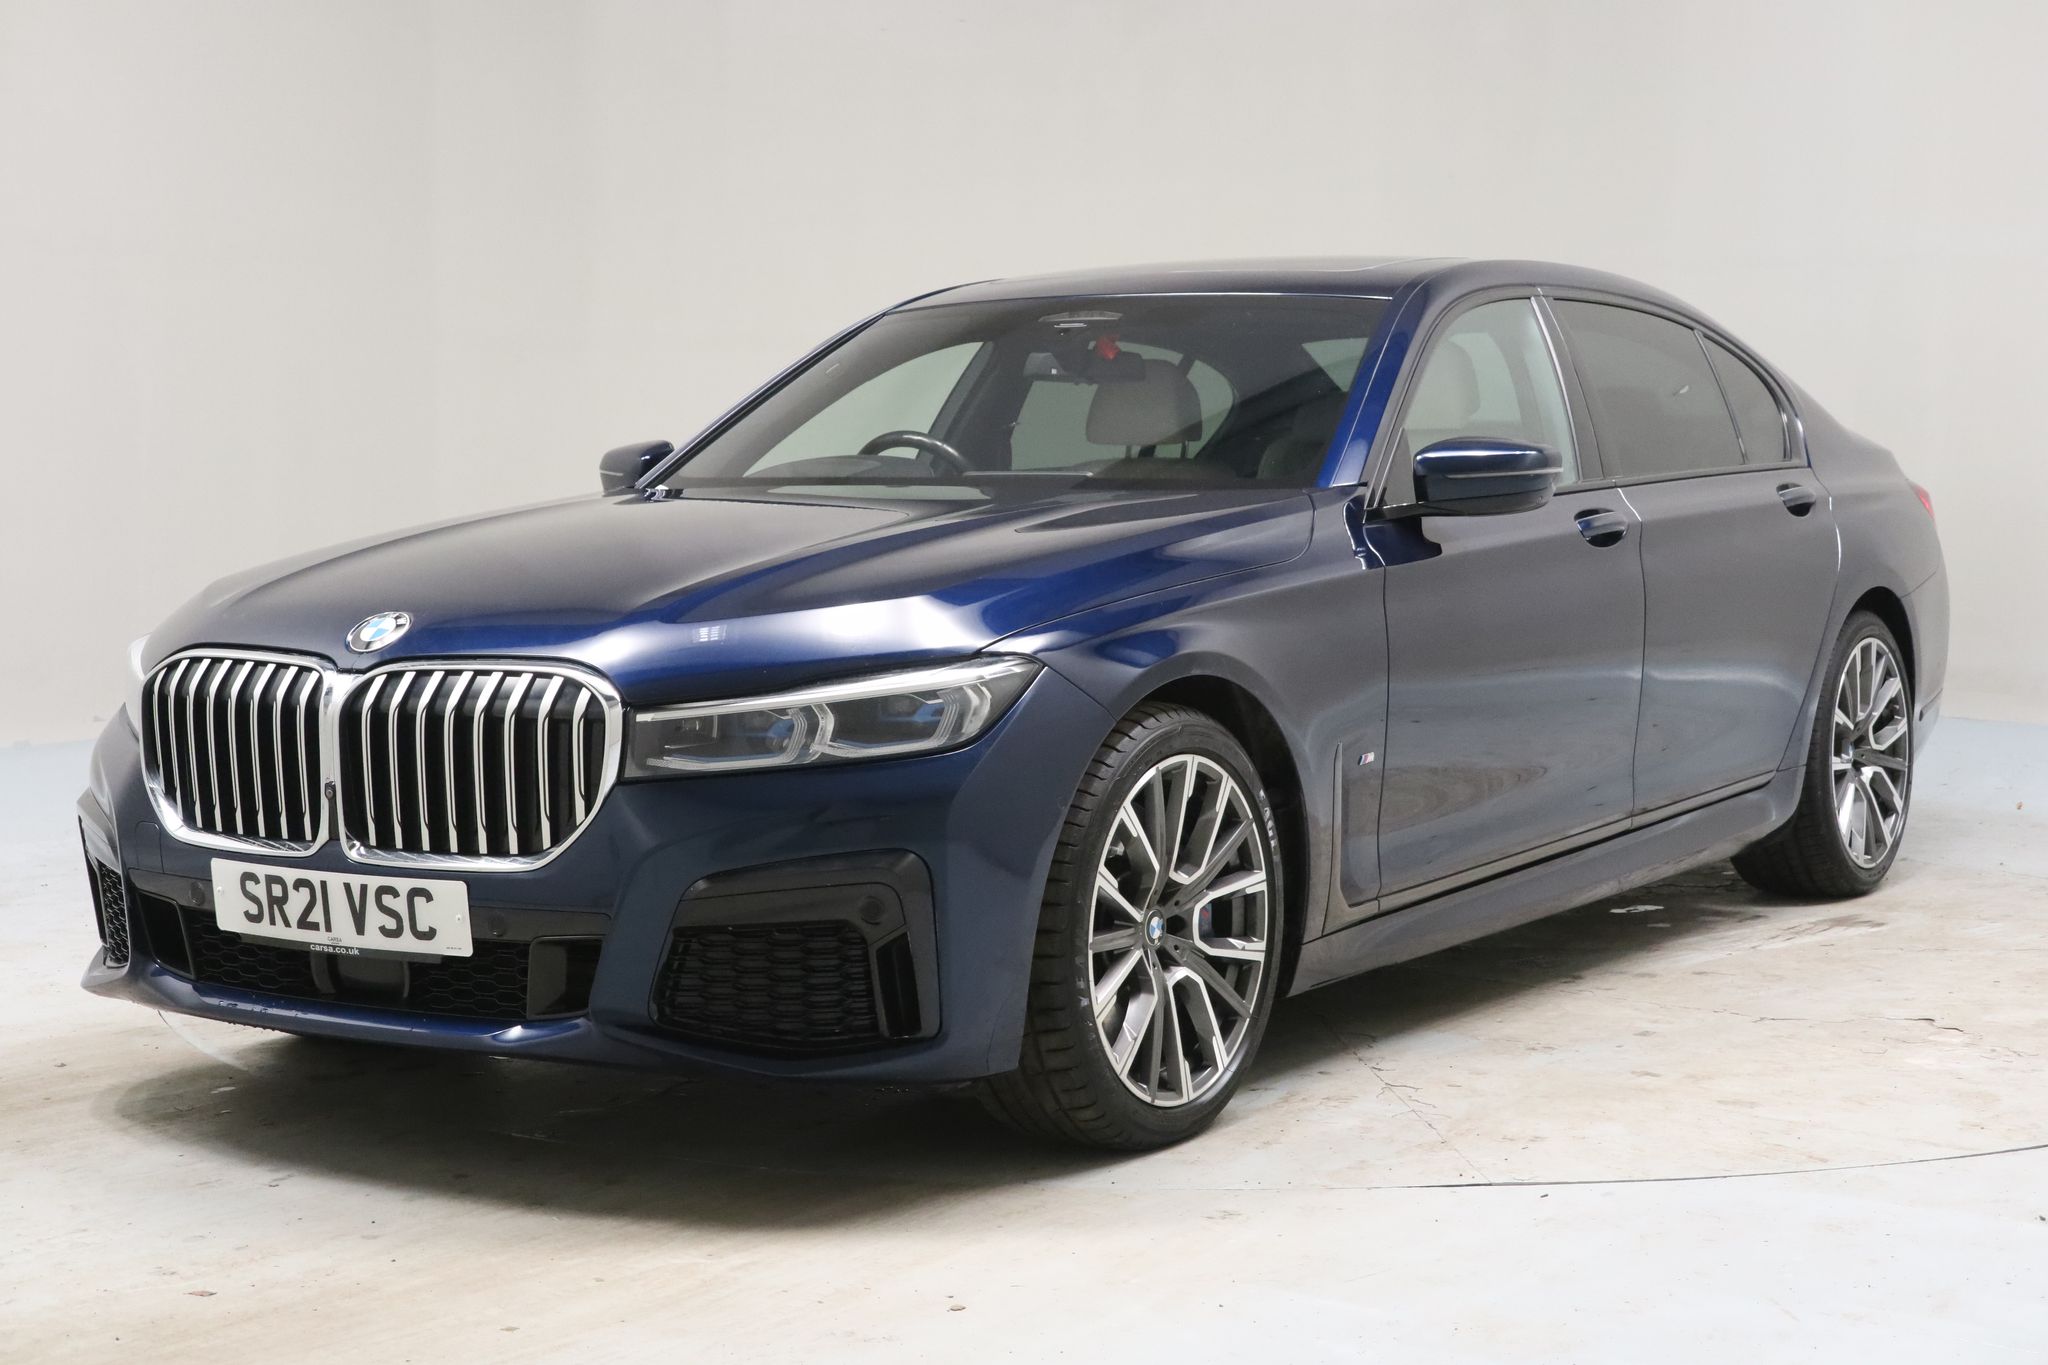 2021 used BMW 7 Series 3.0 730Ld M Sport (265 ps)